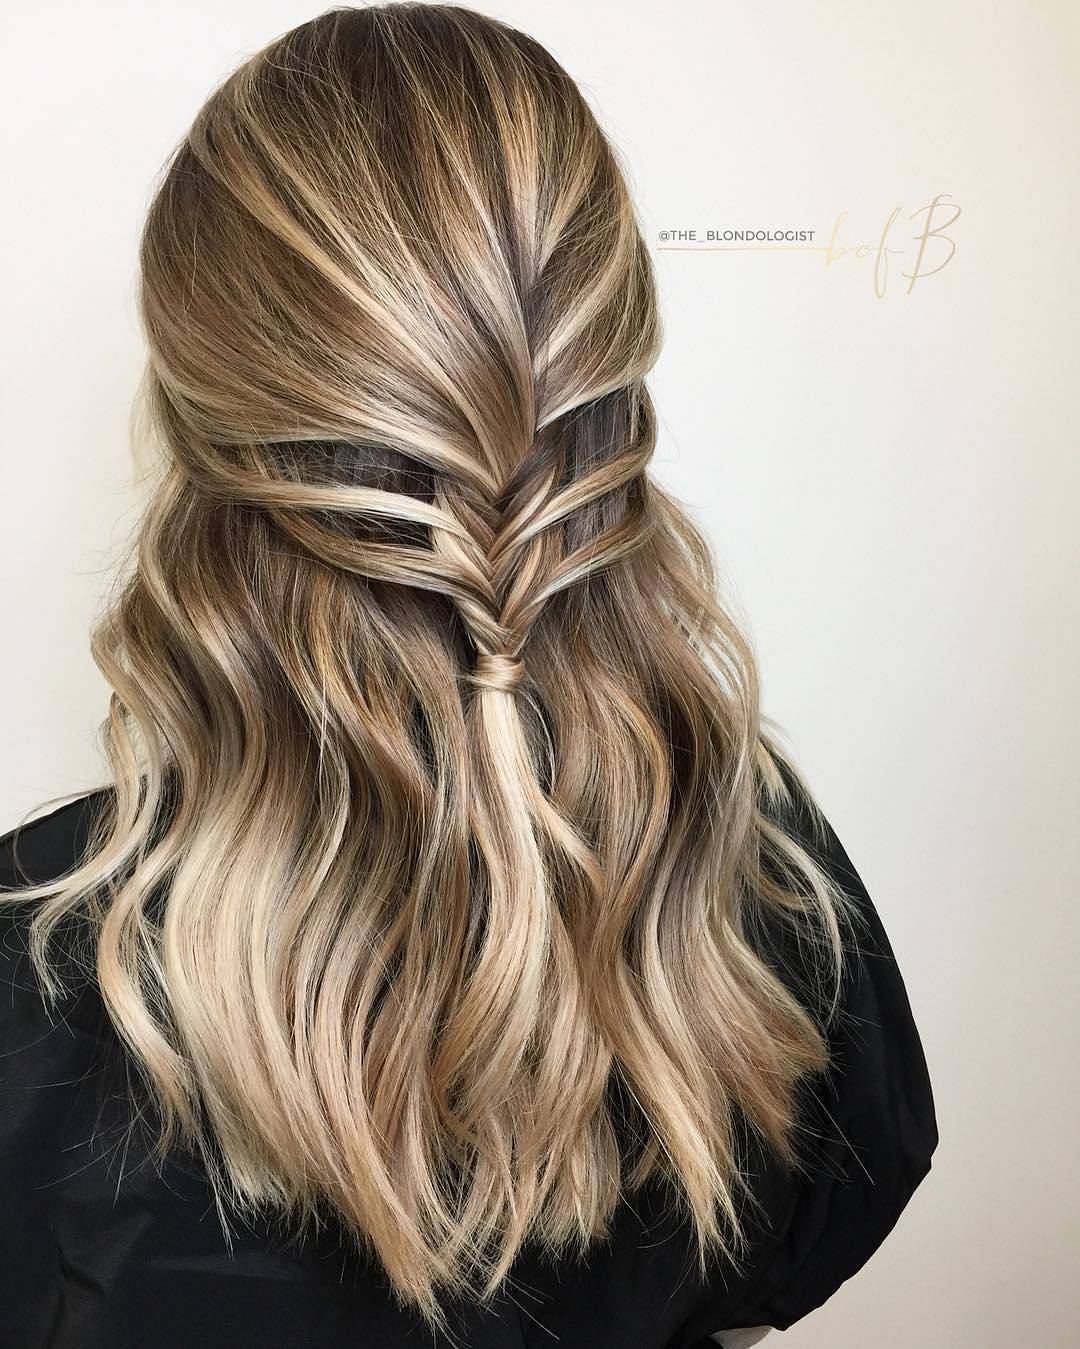 10 Blonde, Brown & Caramel Balayage Hair Color Ideas You Shouldn't Miss -  Her Style Code